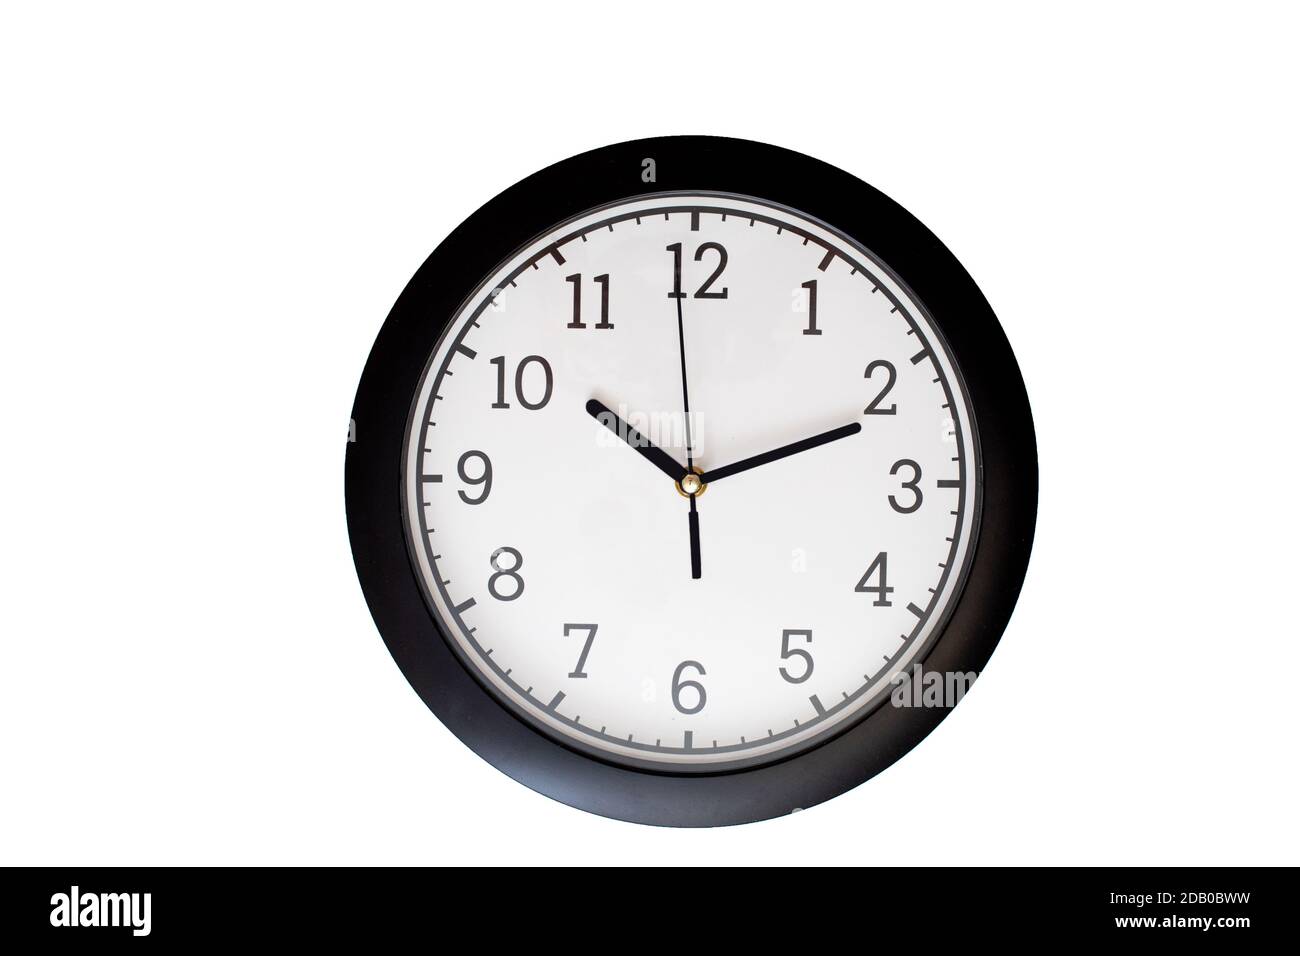 Classic analog clock white dial indicating ten minutes past eleven isolated on white background, front view, close-up. Stock Photo